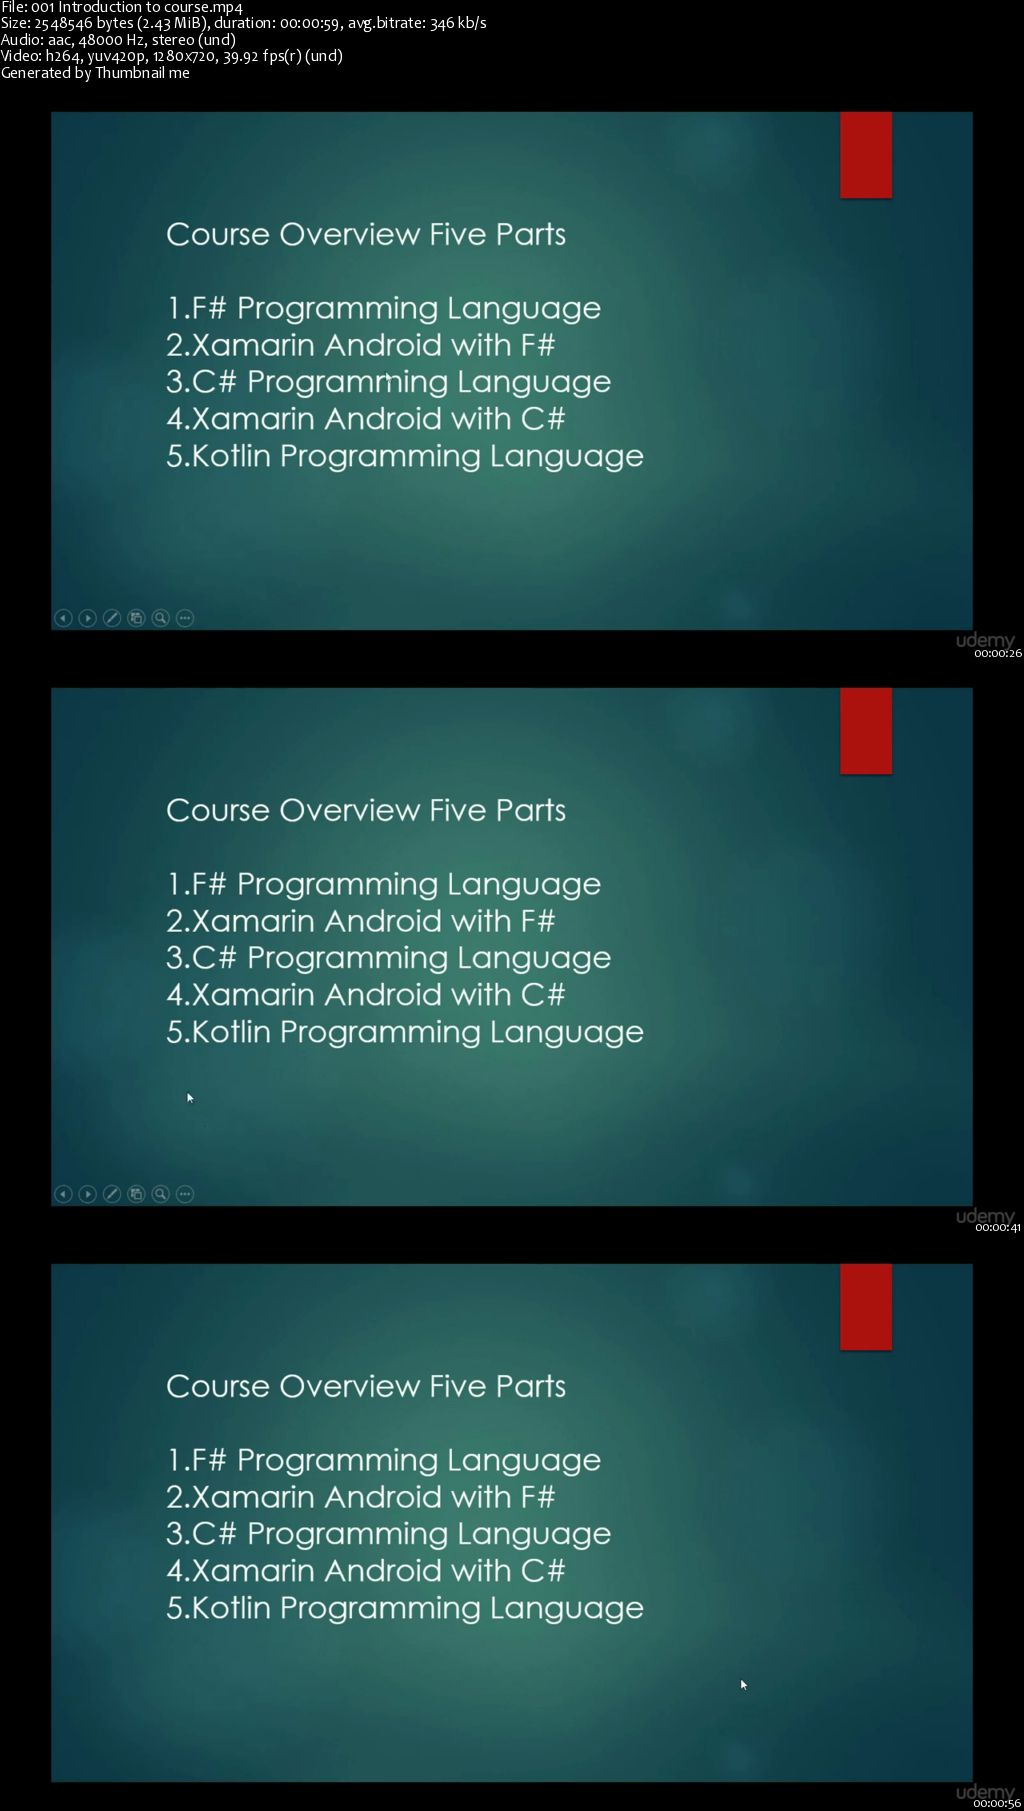 Xamarin Android development with F# and C# & Learn Kotlin